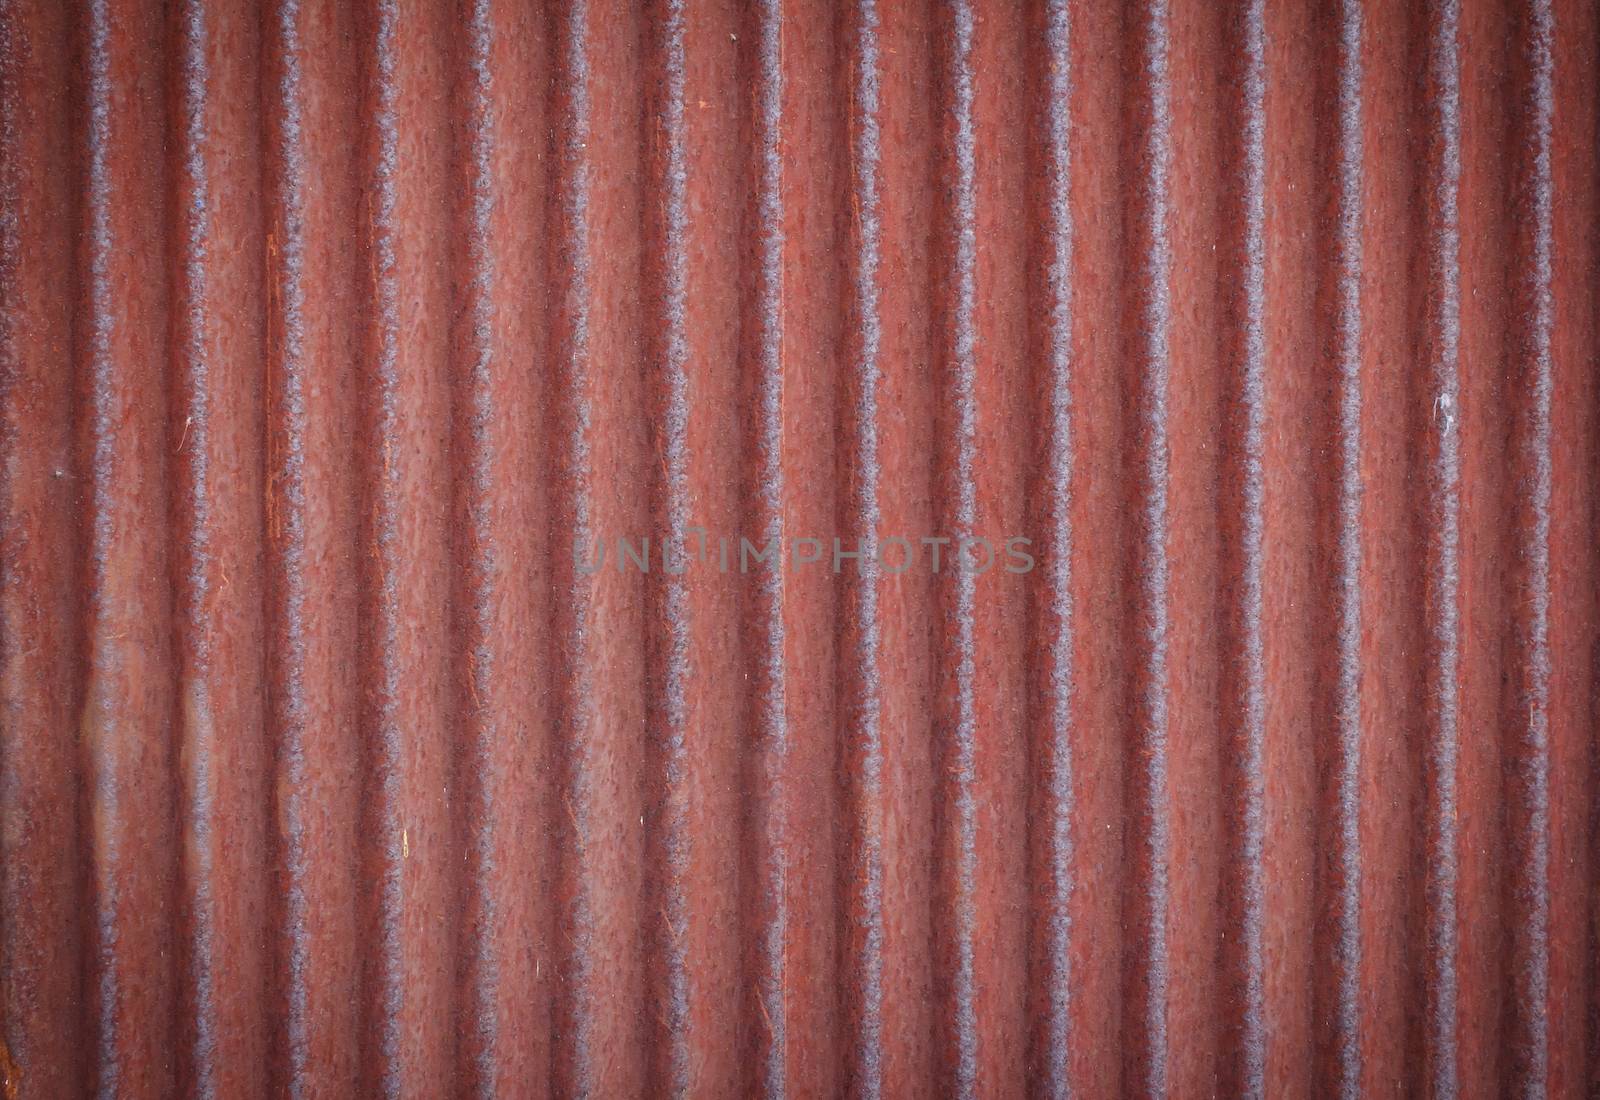 Rusted galvanized iron plate by vitawin